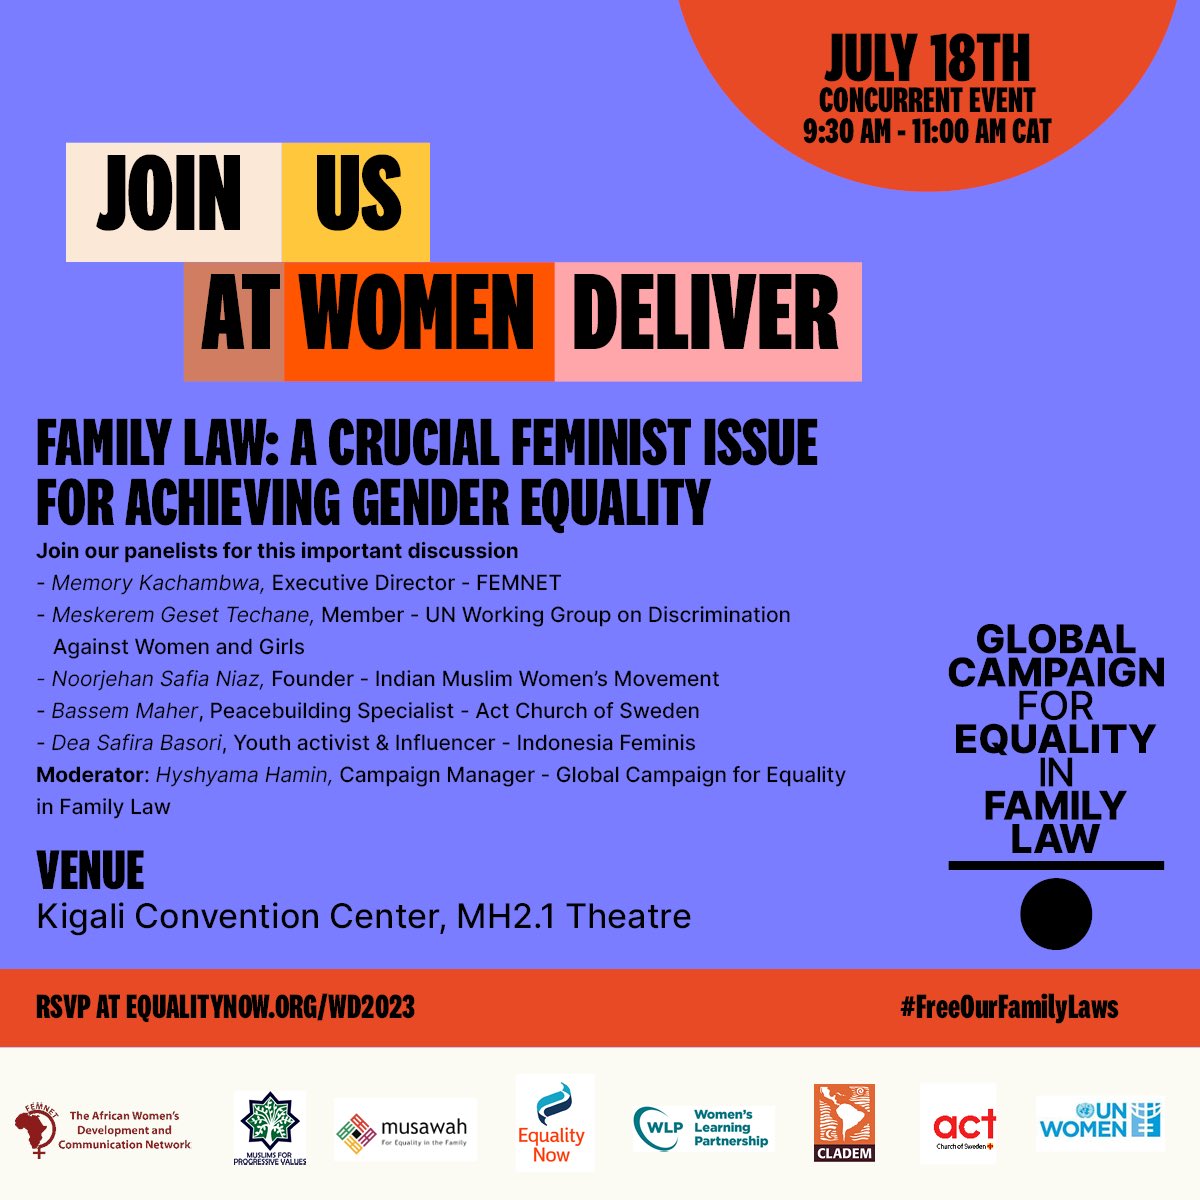 Are you attending #WD2023? 

So is the Global Campaign for Equality in Family Law!

Mark your calendars for our Concurrent event 'Family Law: A Crucial Feminist Issue for Achieving Gender Equality' - July 18th 9:00am at MH2.1. Theatre KCC. 

Join us to #FreeOurFamilyLaws